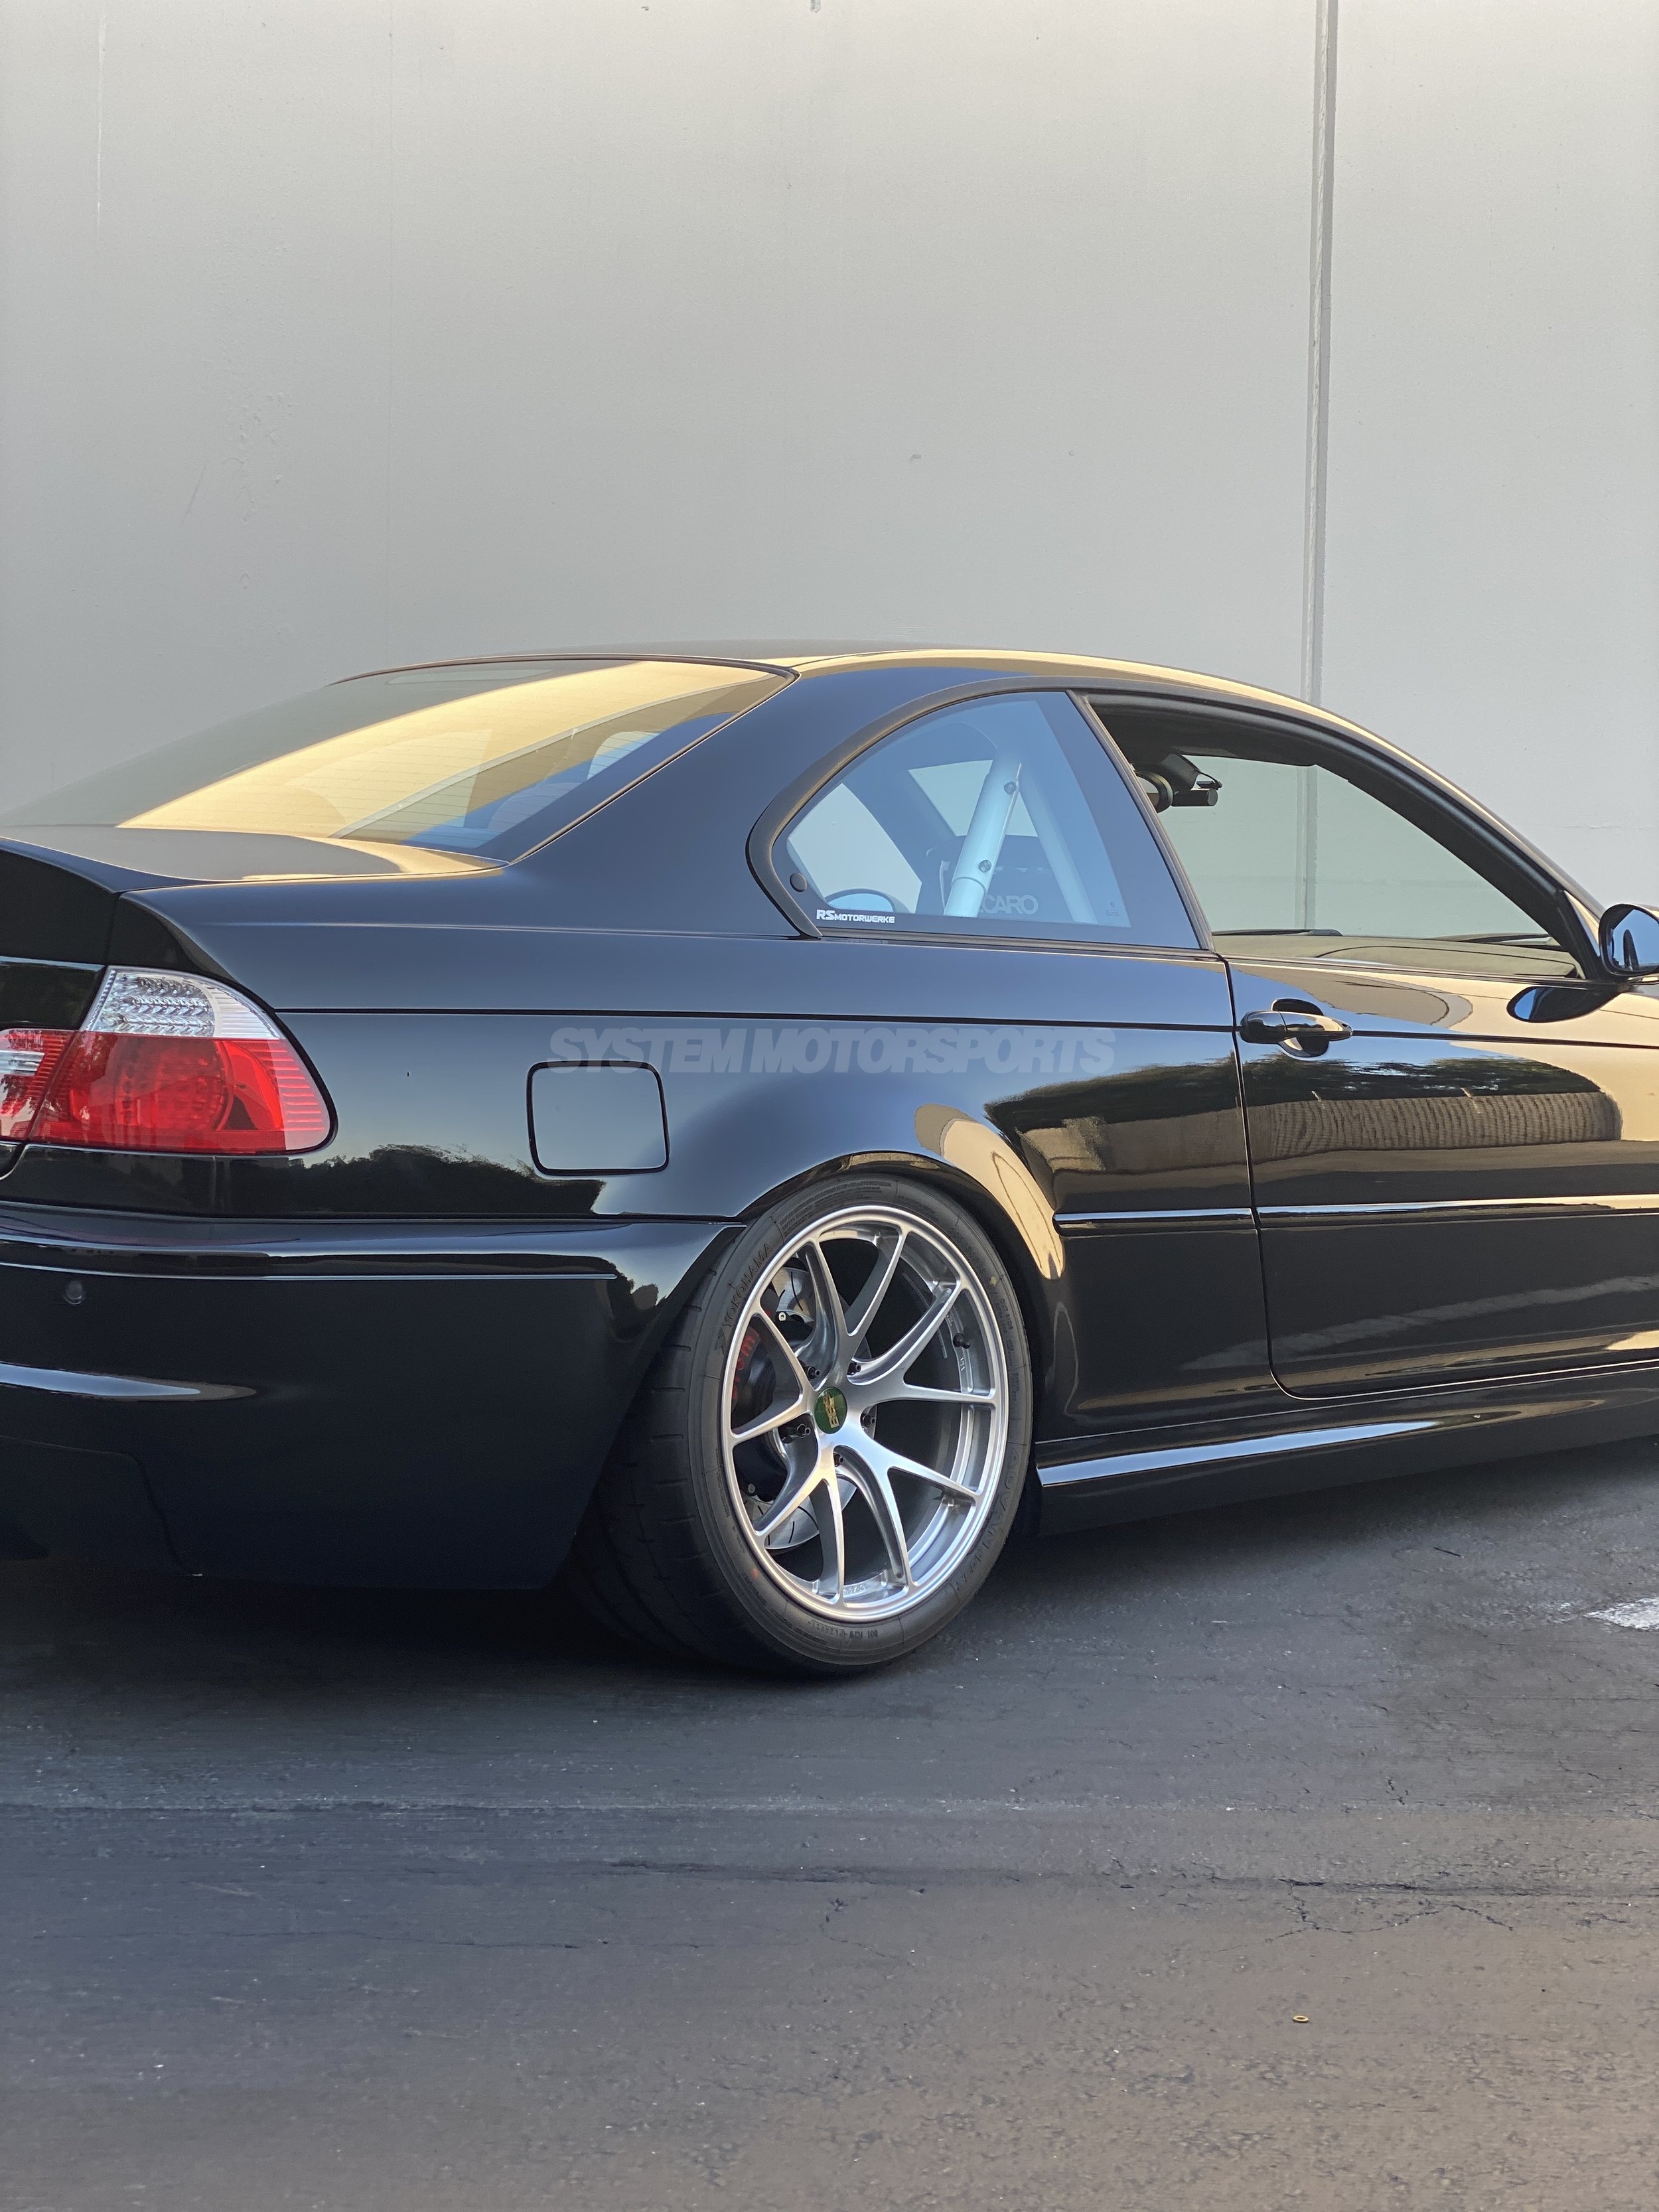 E46 M3, that I saw in Japan : r/Stance